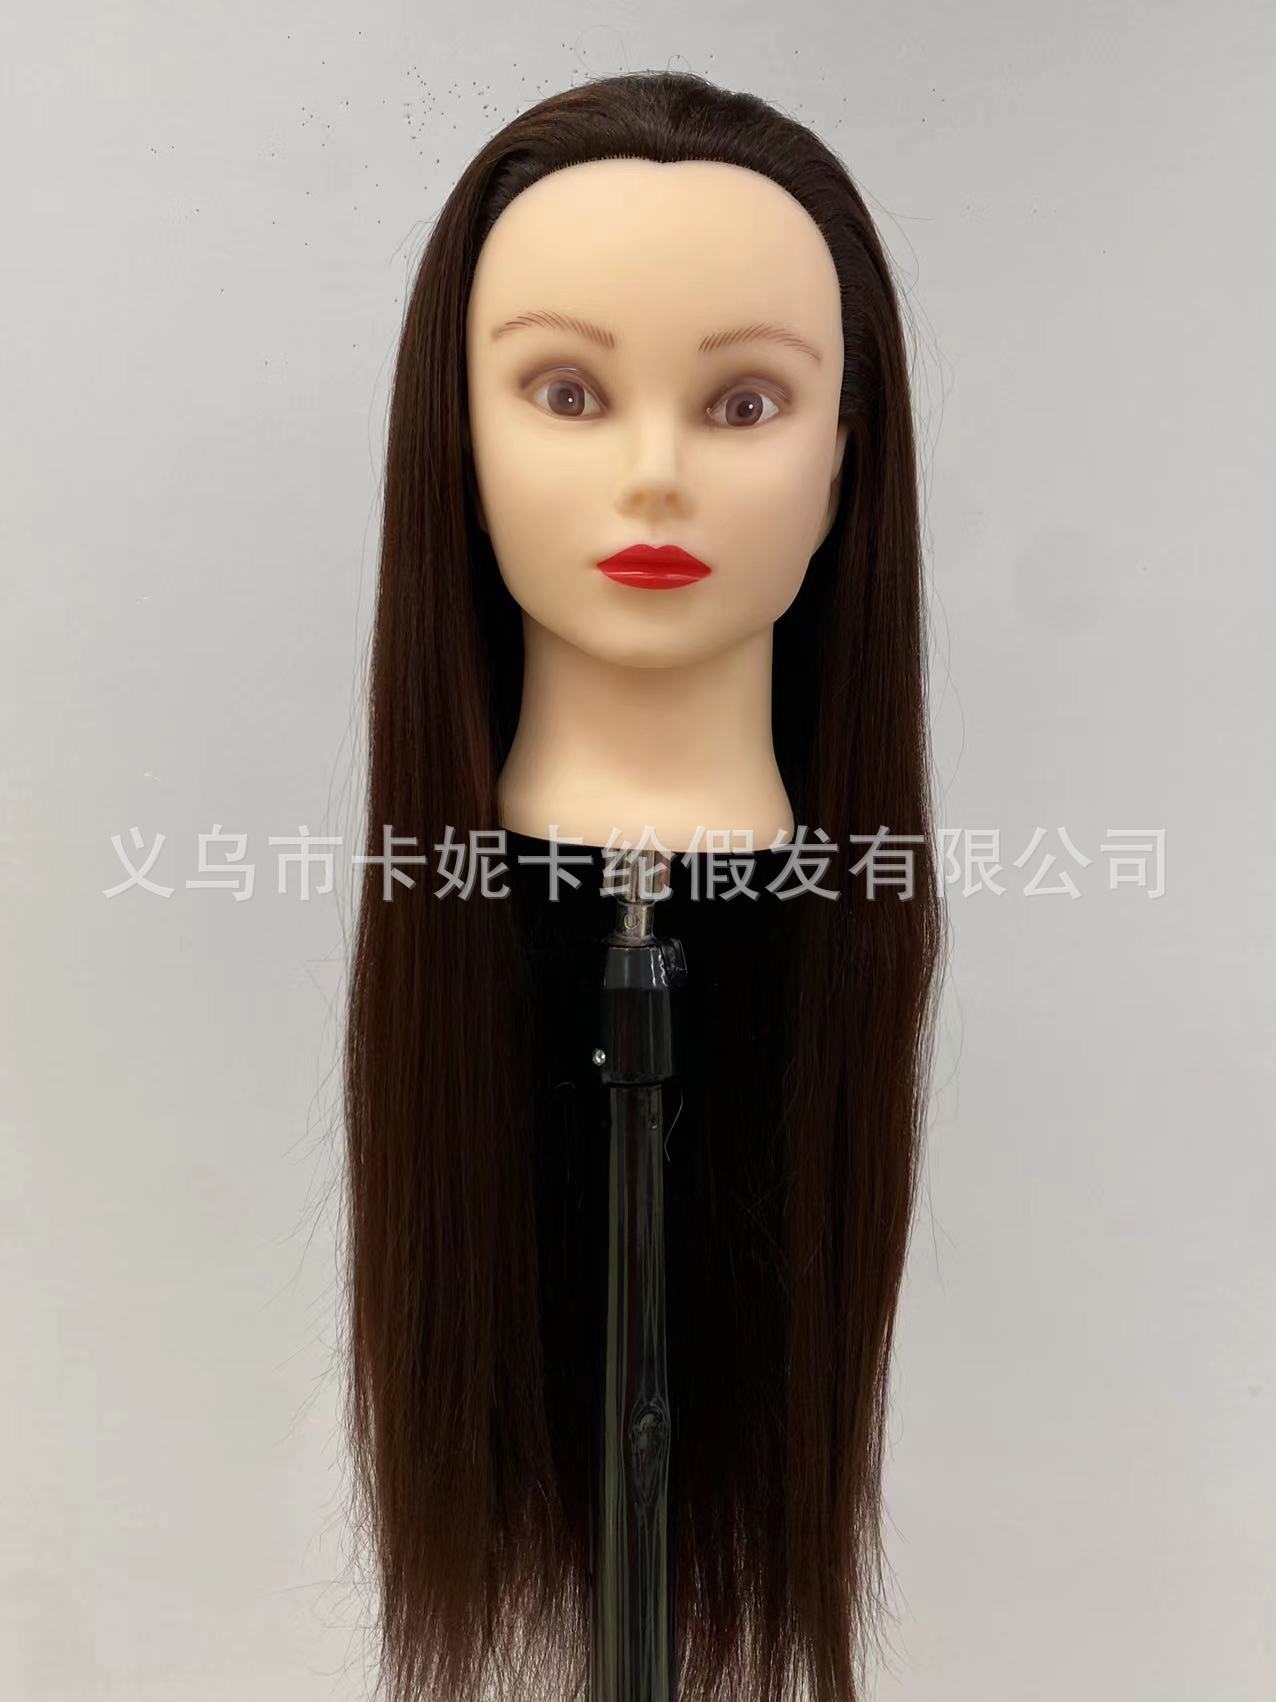 newlook hairdressing head model wig can practice hair cutting and braiding updo hair updo head makeup modeling head wig